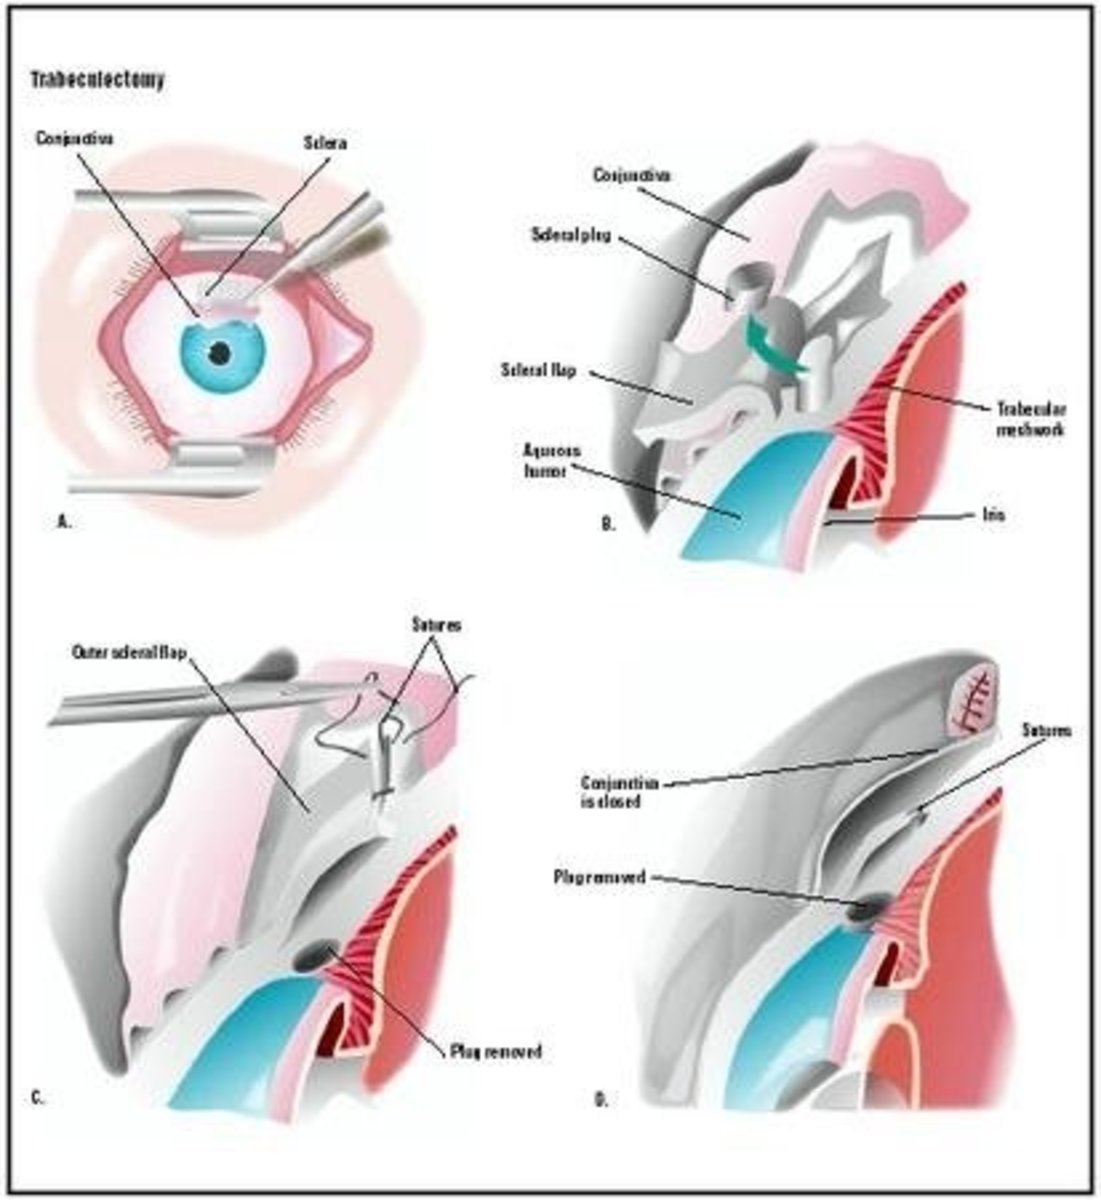 trabeculectomy